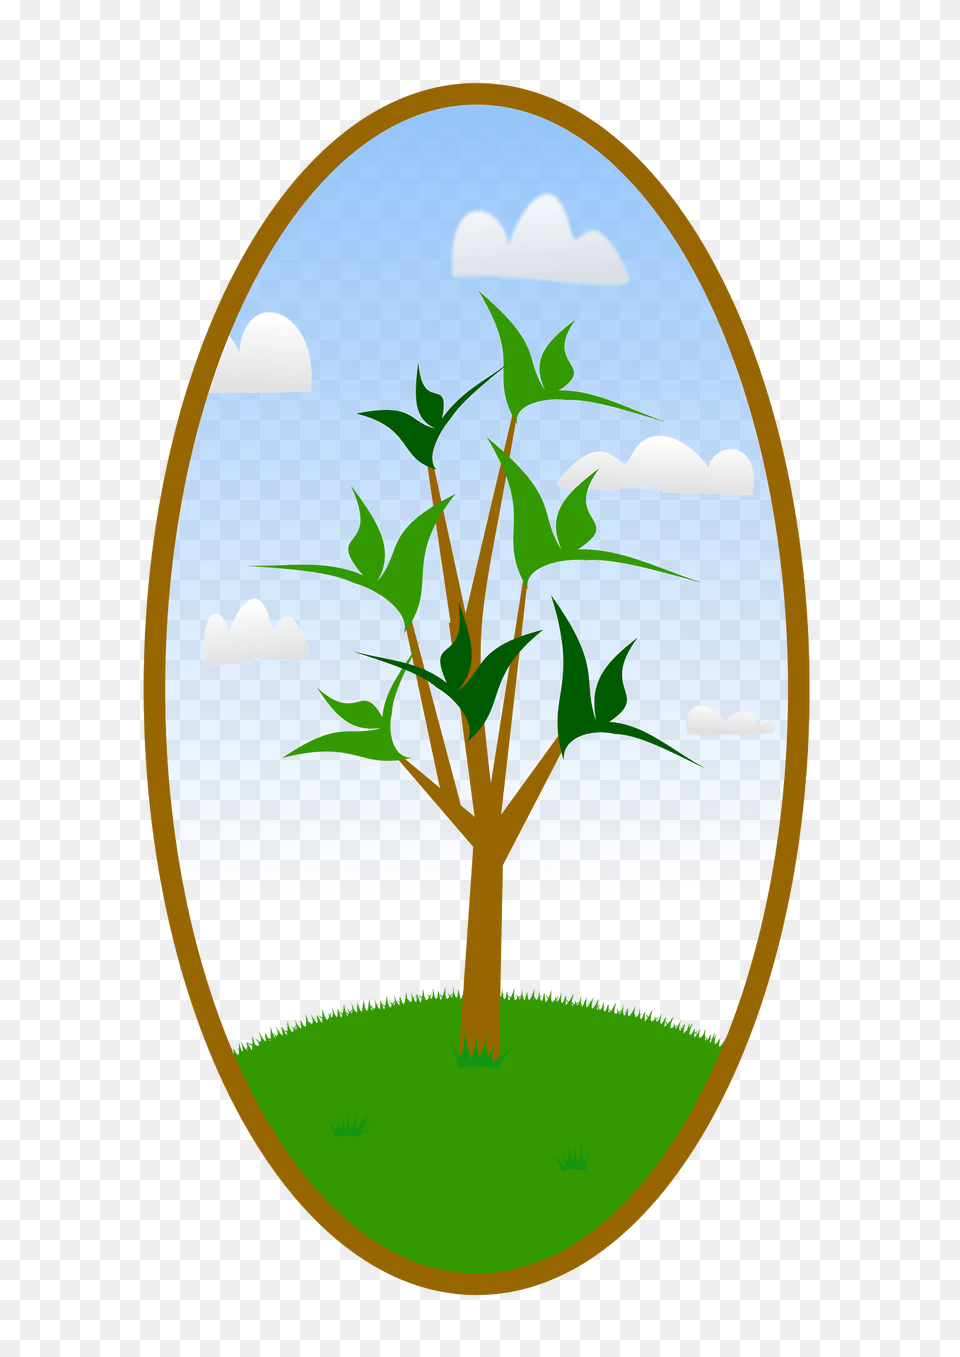 Oval Tree Landscape Clipart, Leaf, Plant, Grass, Outdoors Png